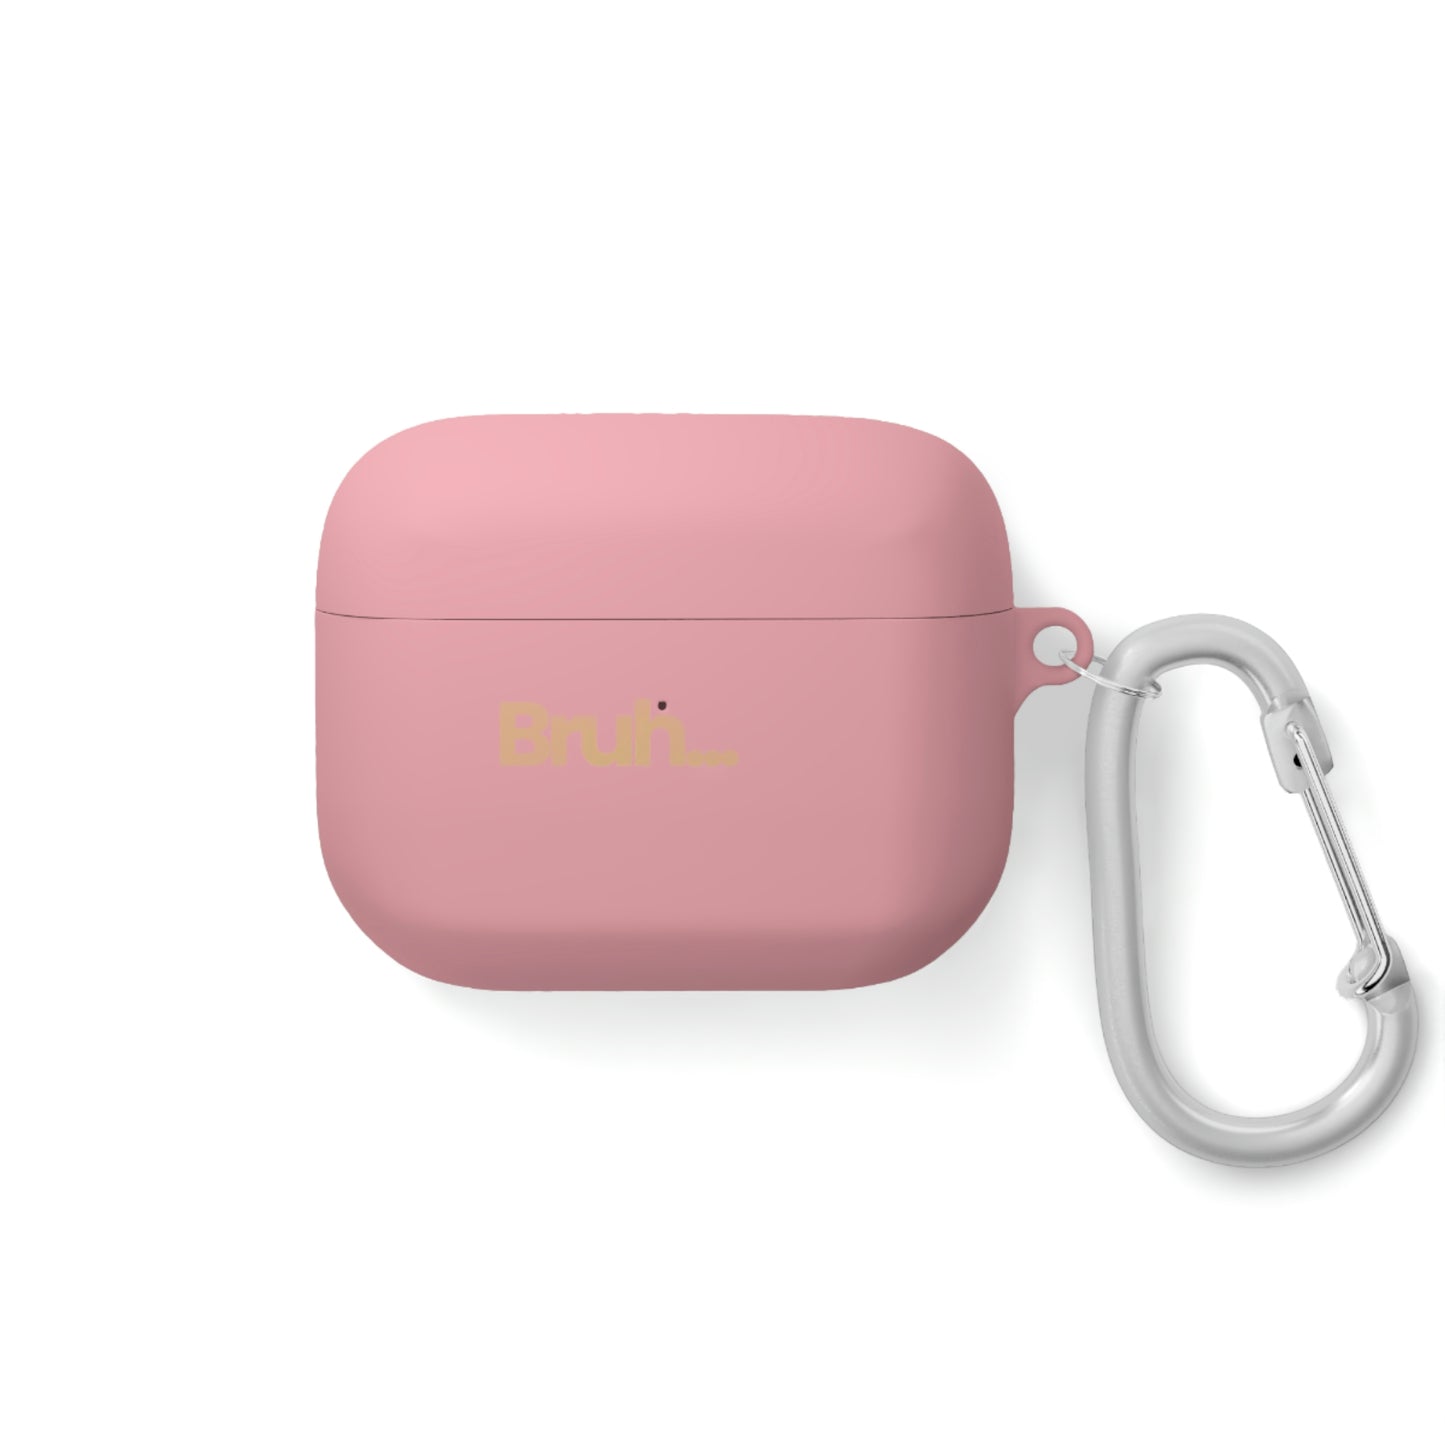 Bruh...AirPods and AirPods Pro Case Cover